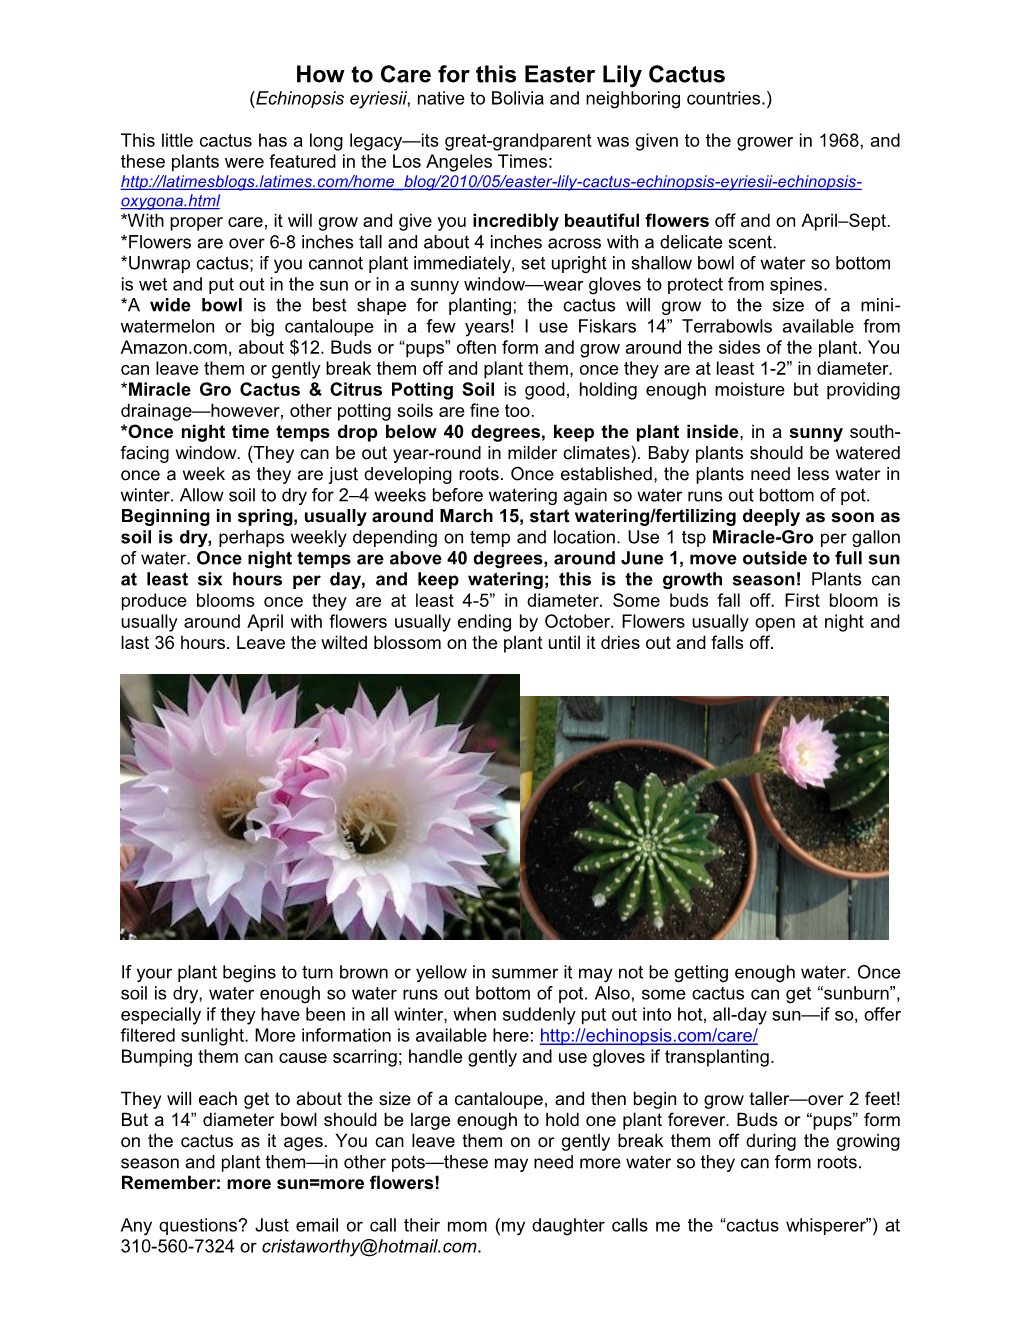 Easter Lily Cactus (Echinopsis Eyriesii, Native to Bolivia and Neighboring Countries.)